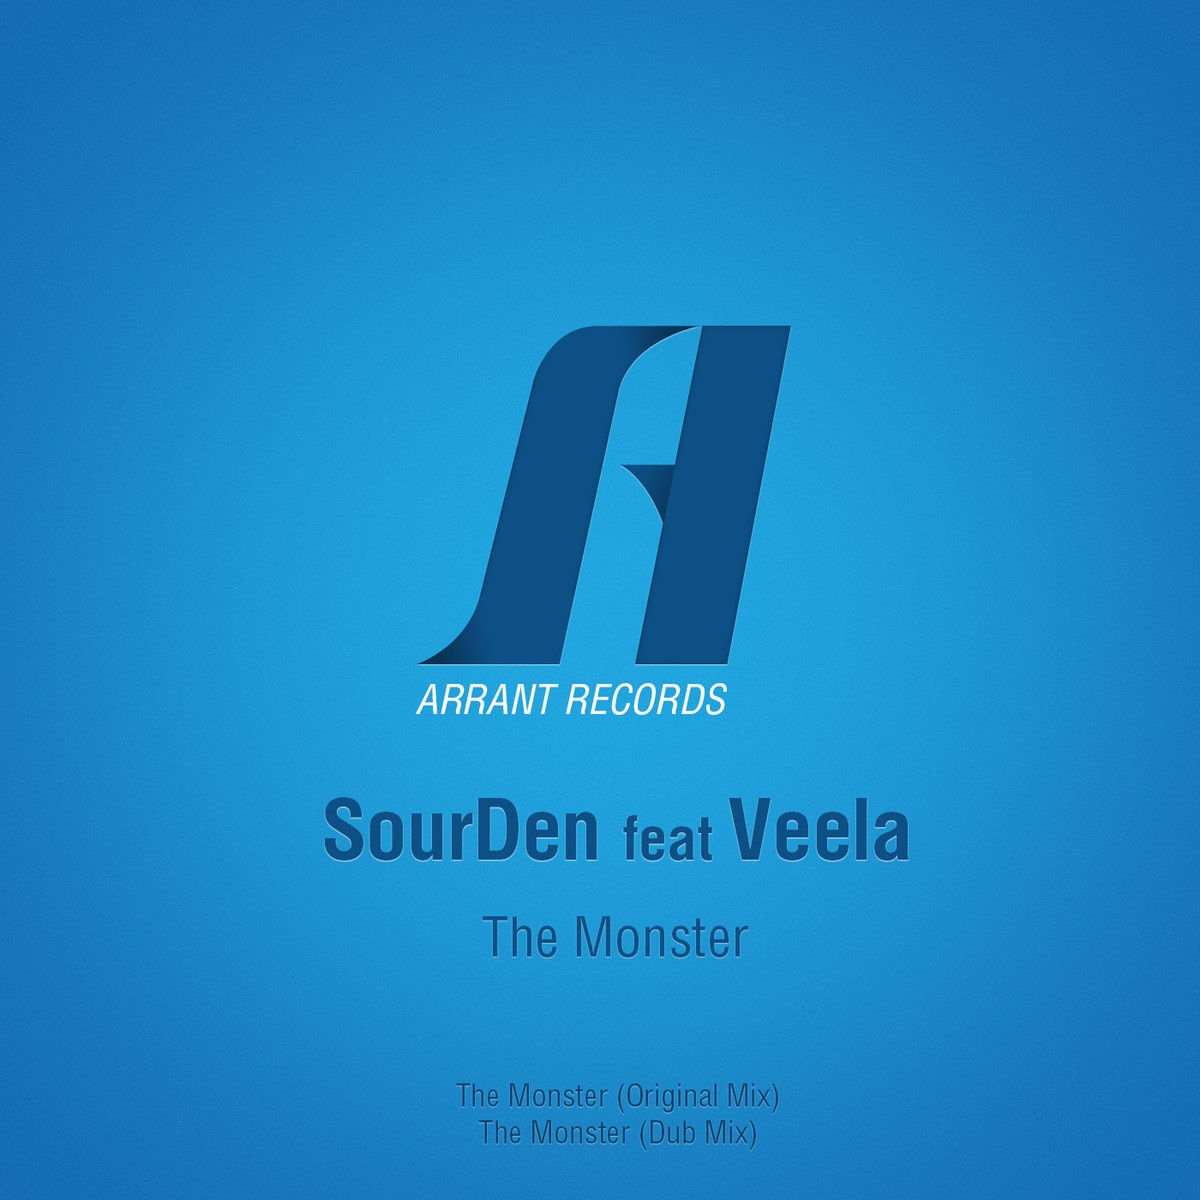 The Monster (Dub Mix)